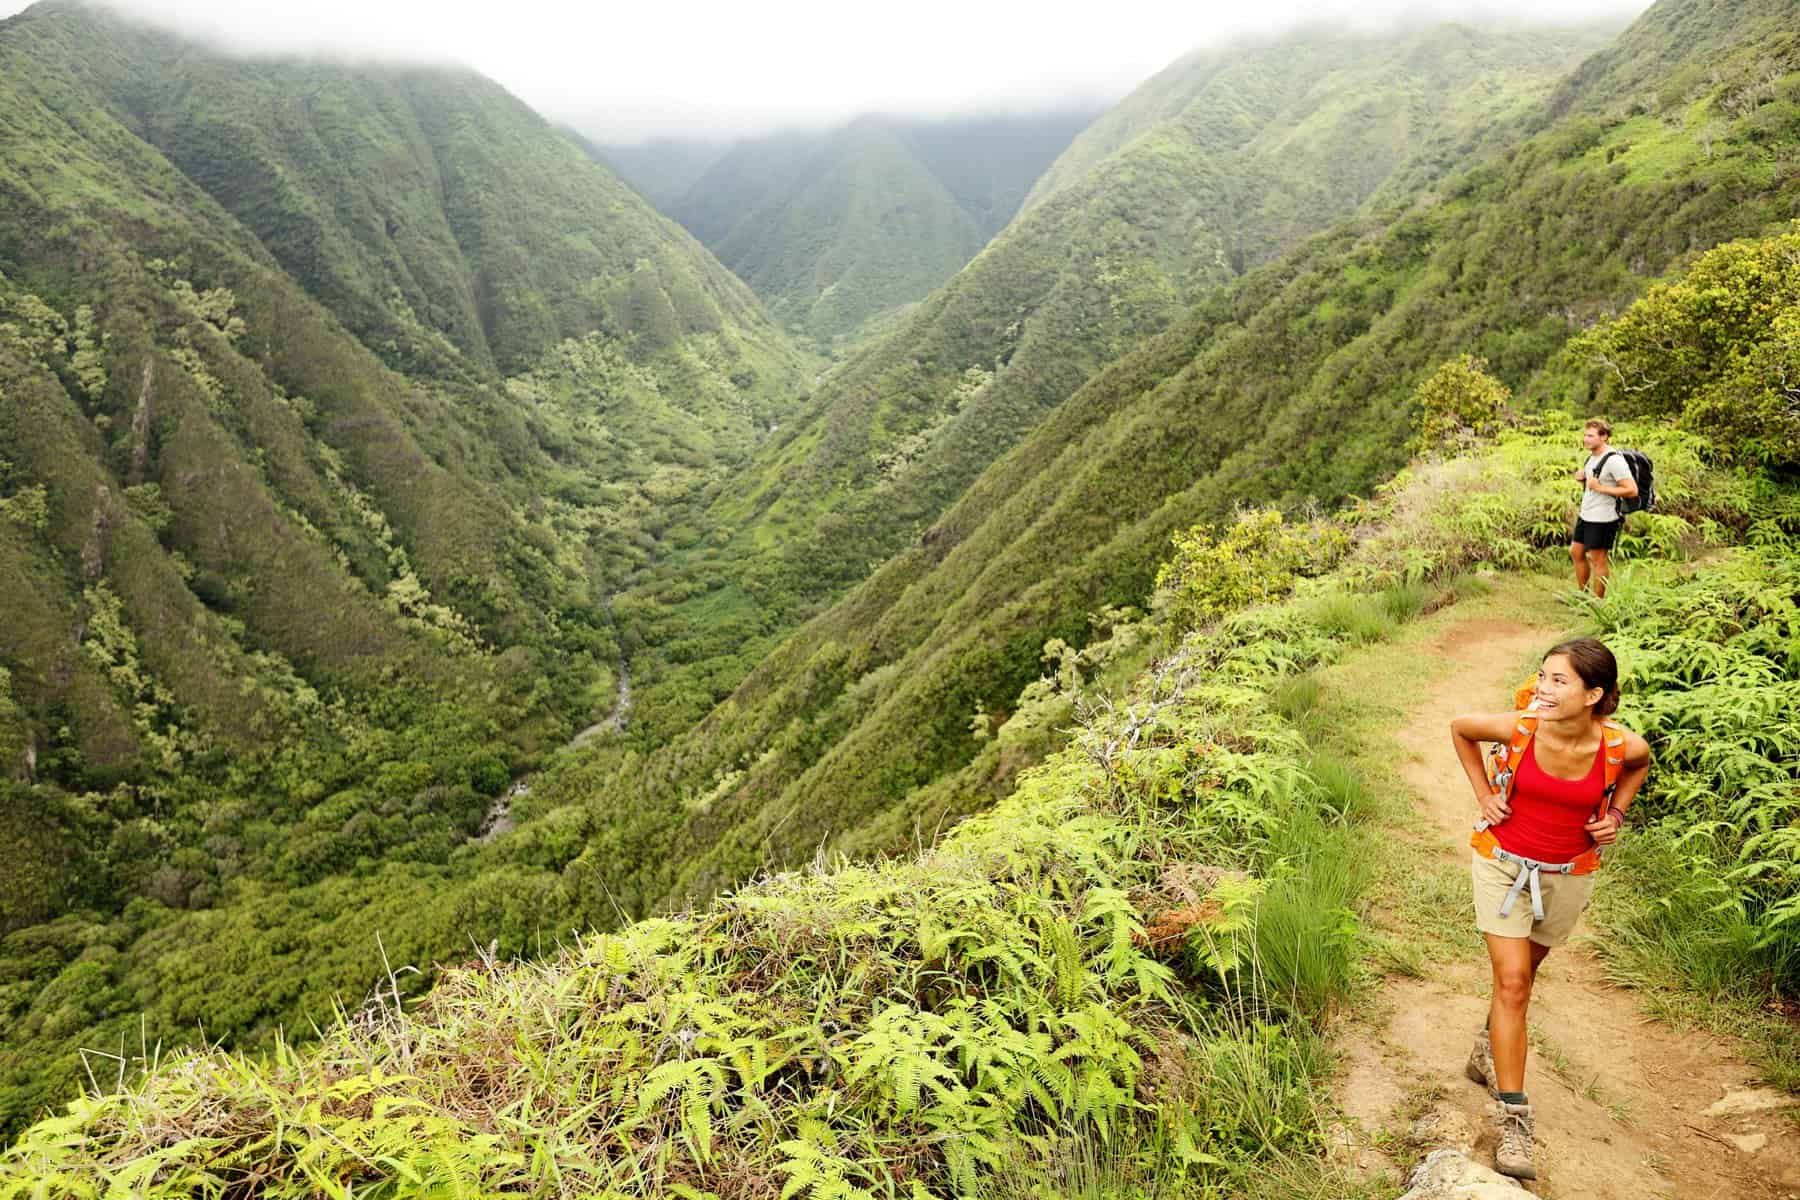 Best Hiking Shoes For Hawaii